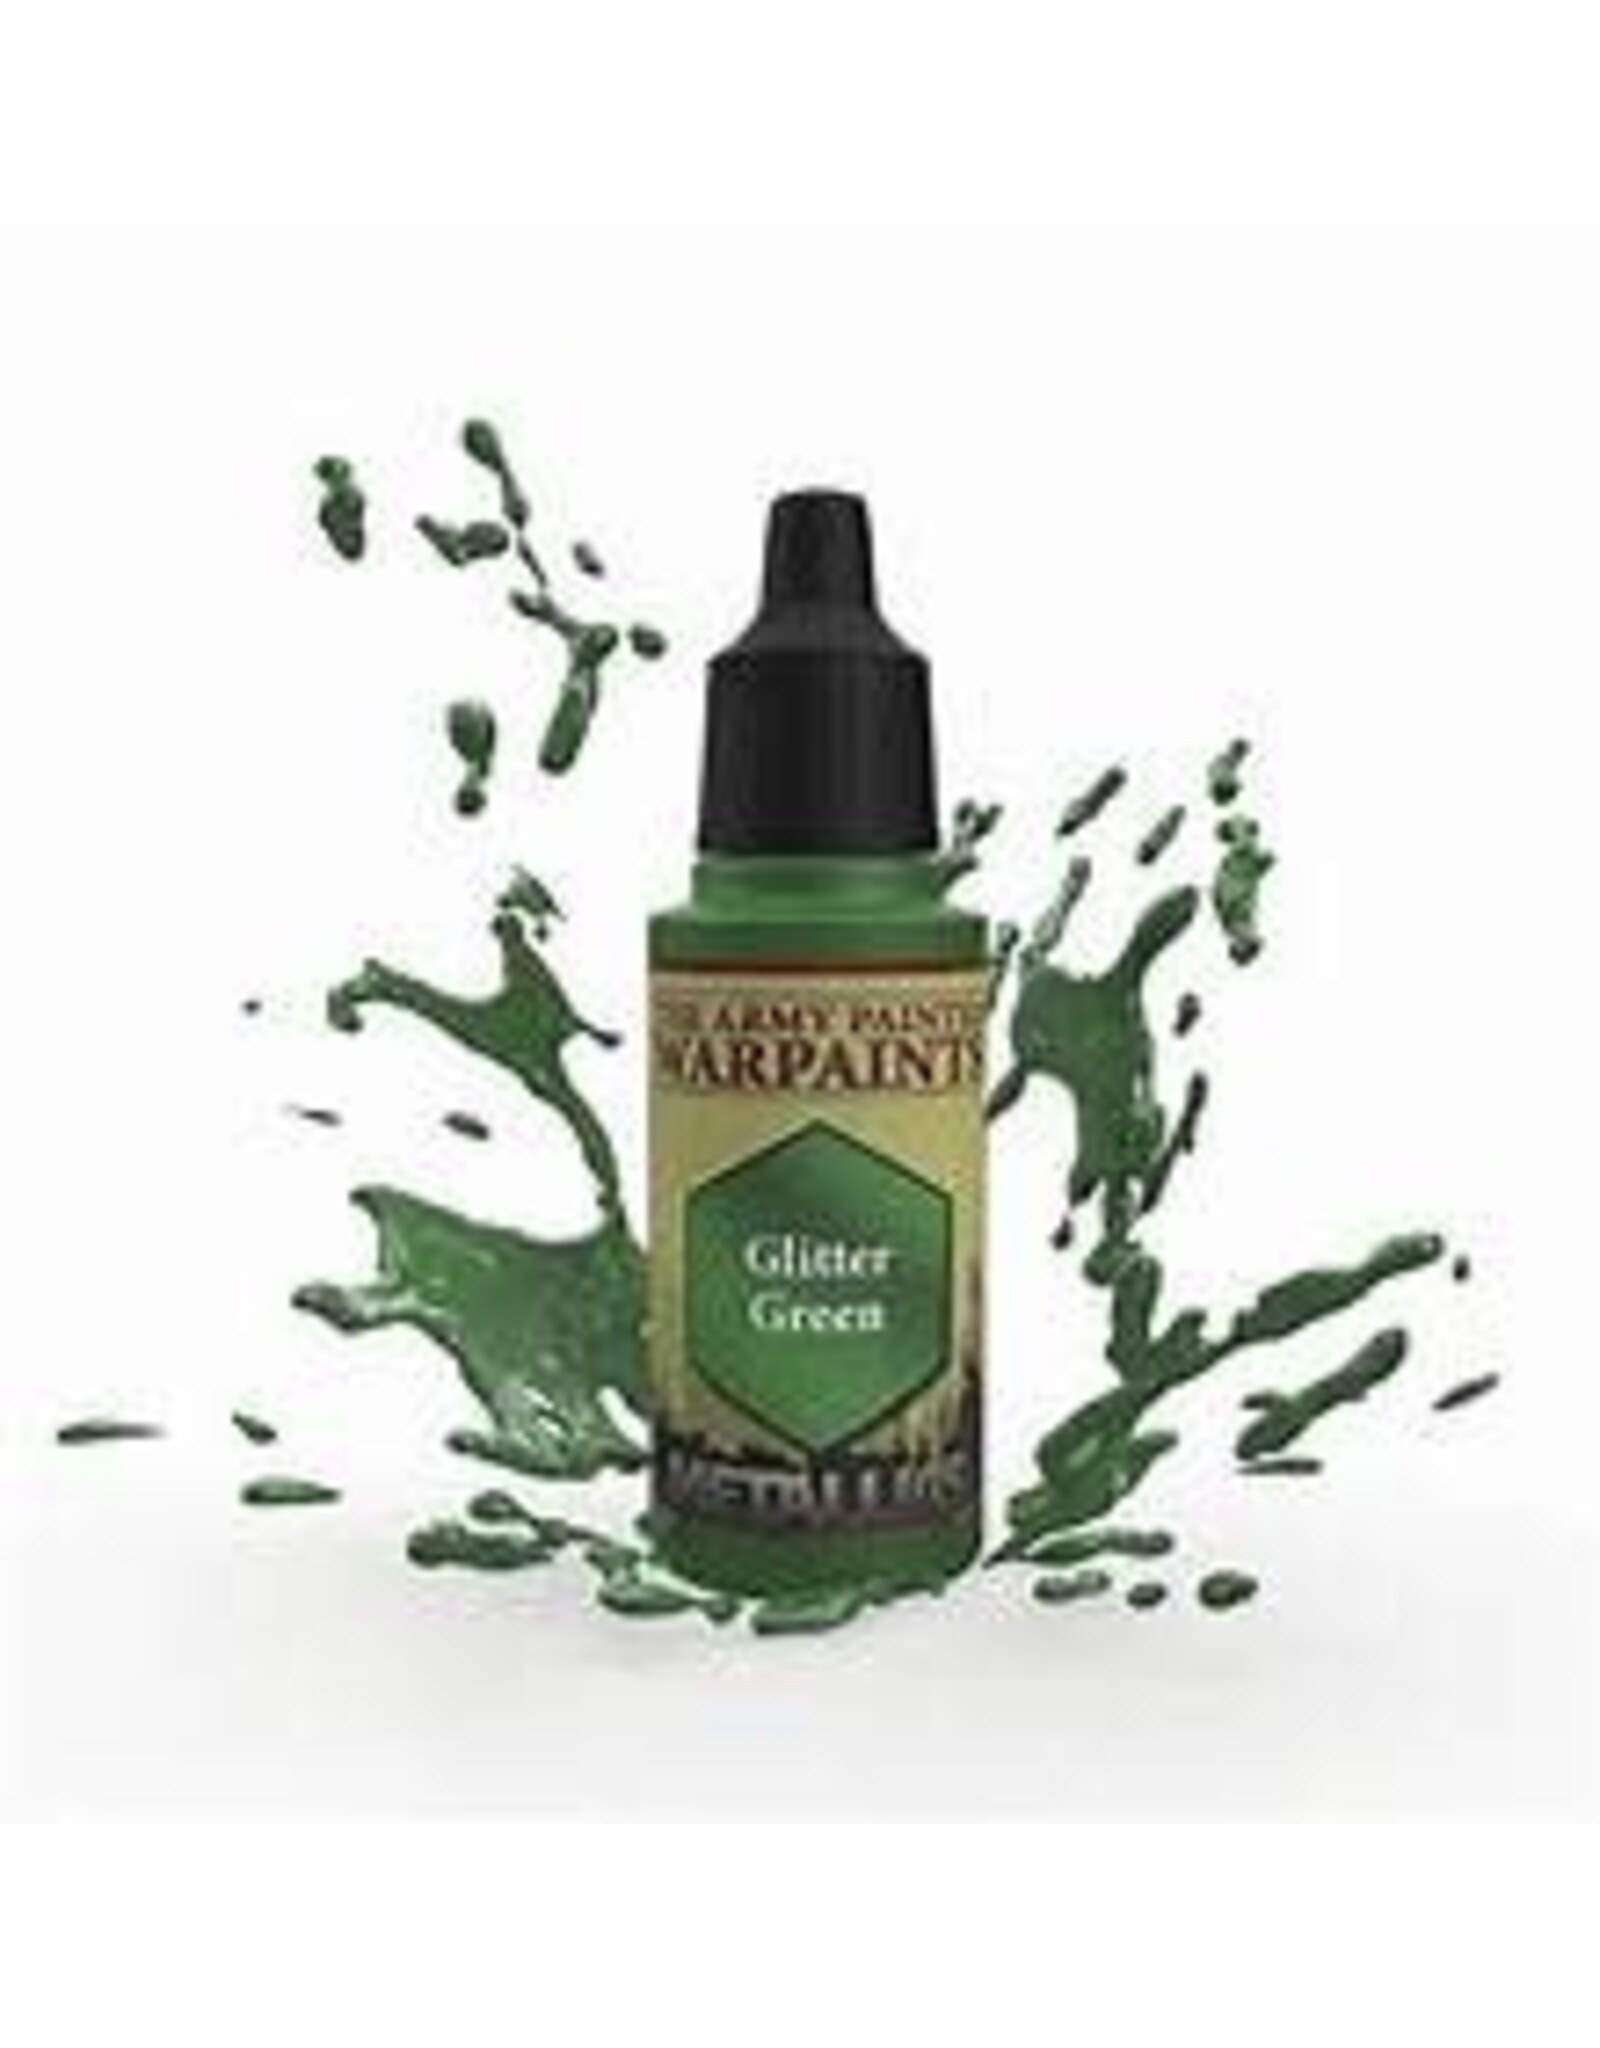 The Army Painter WP1484 Glitter Green